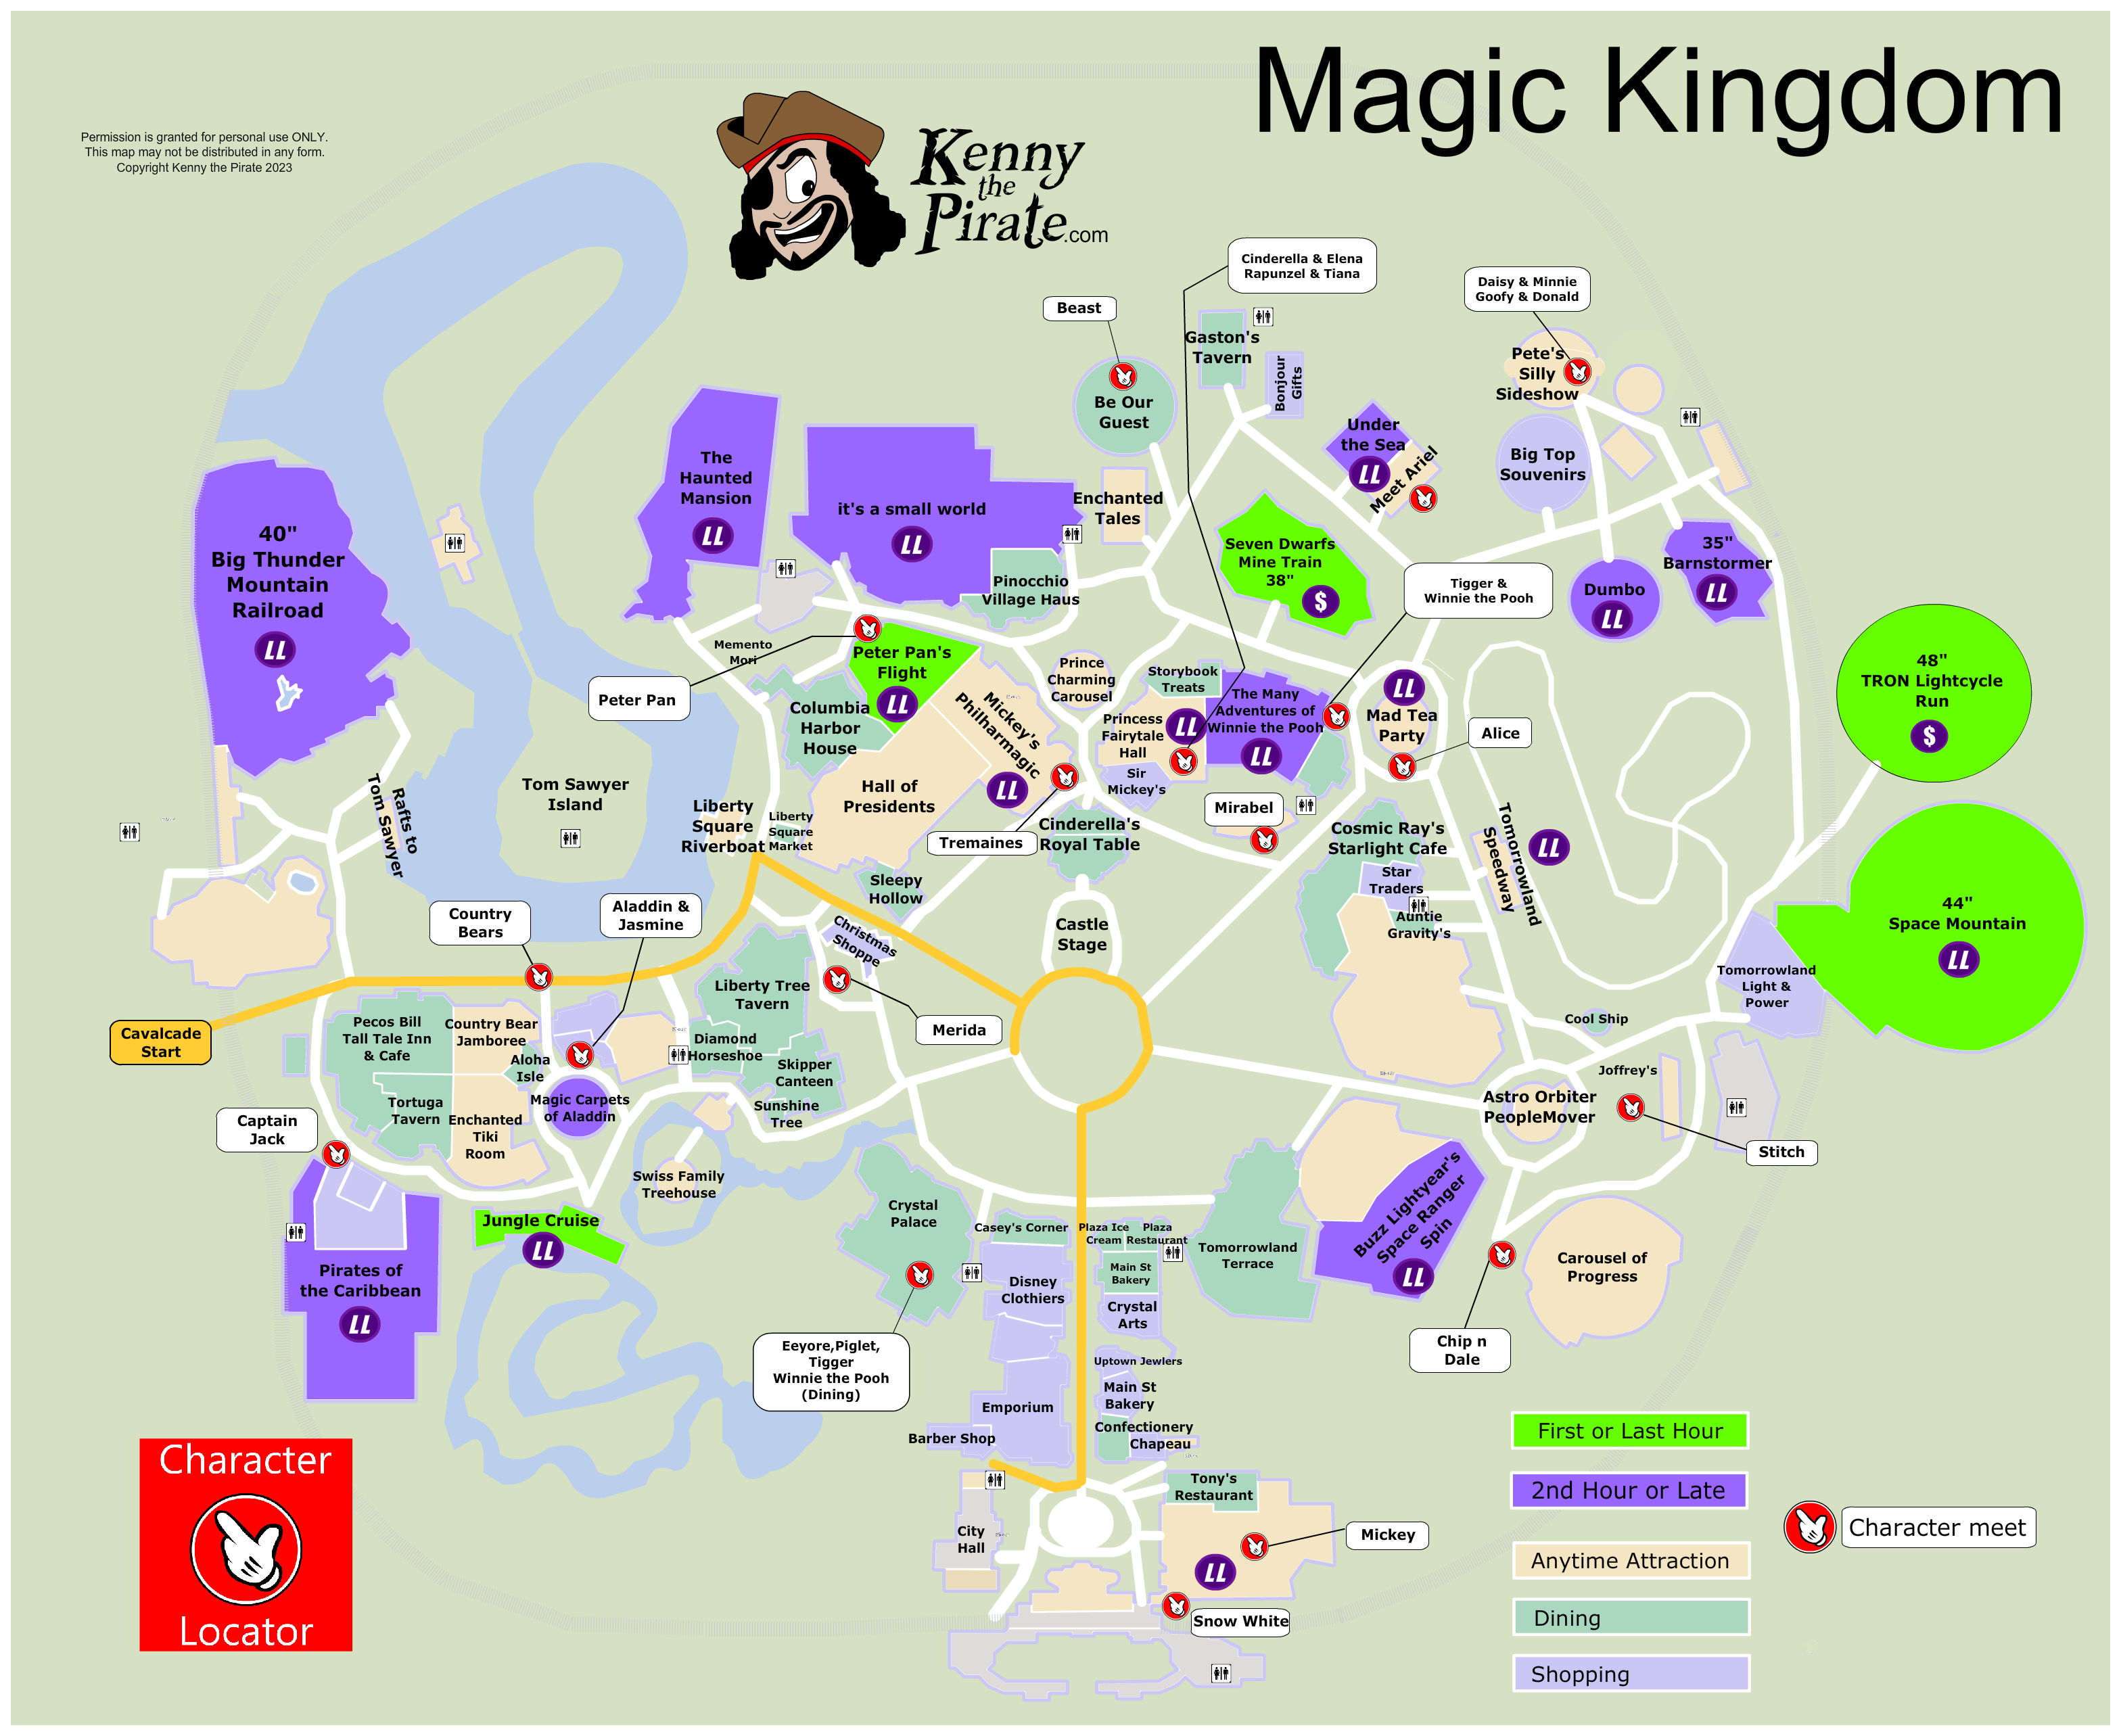 KennythePirate’s Magic Kingdom Map including Fastpass Plus locations